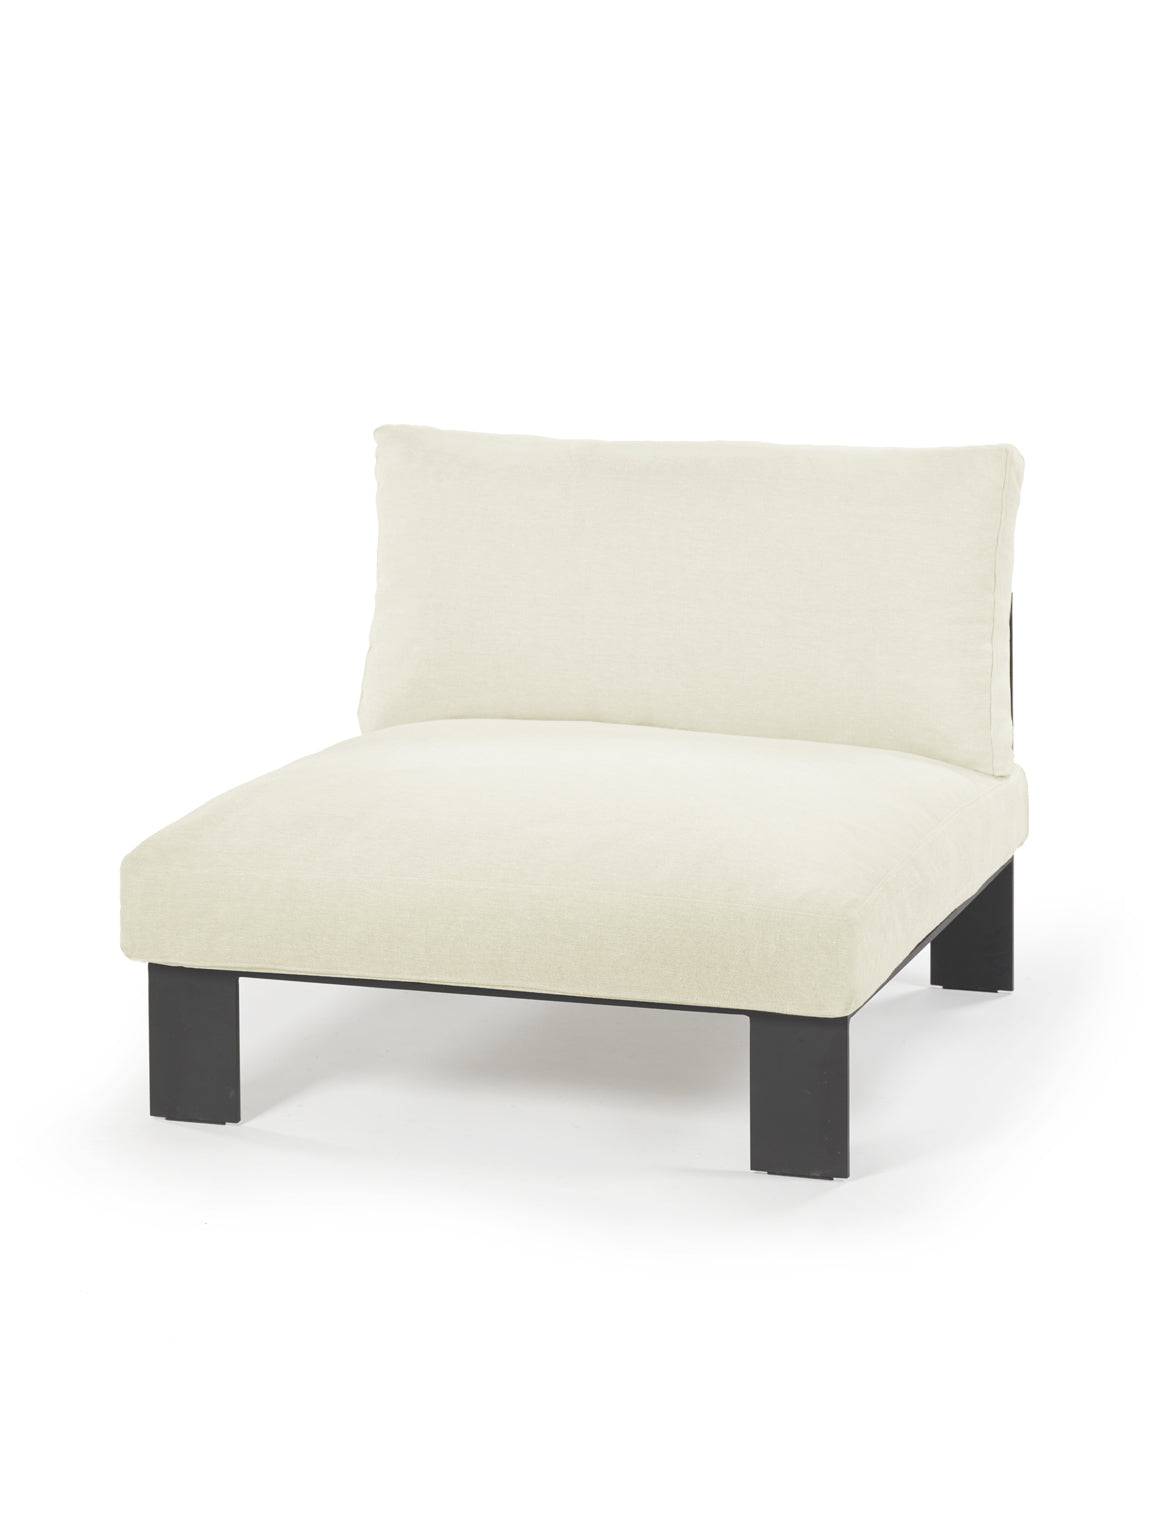 Mombaers Lounge Chair - White - THAT COOL LIVING